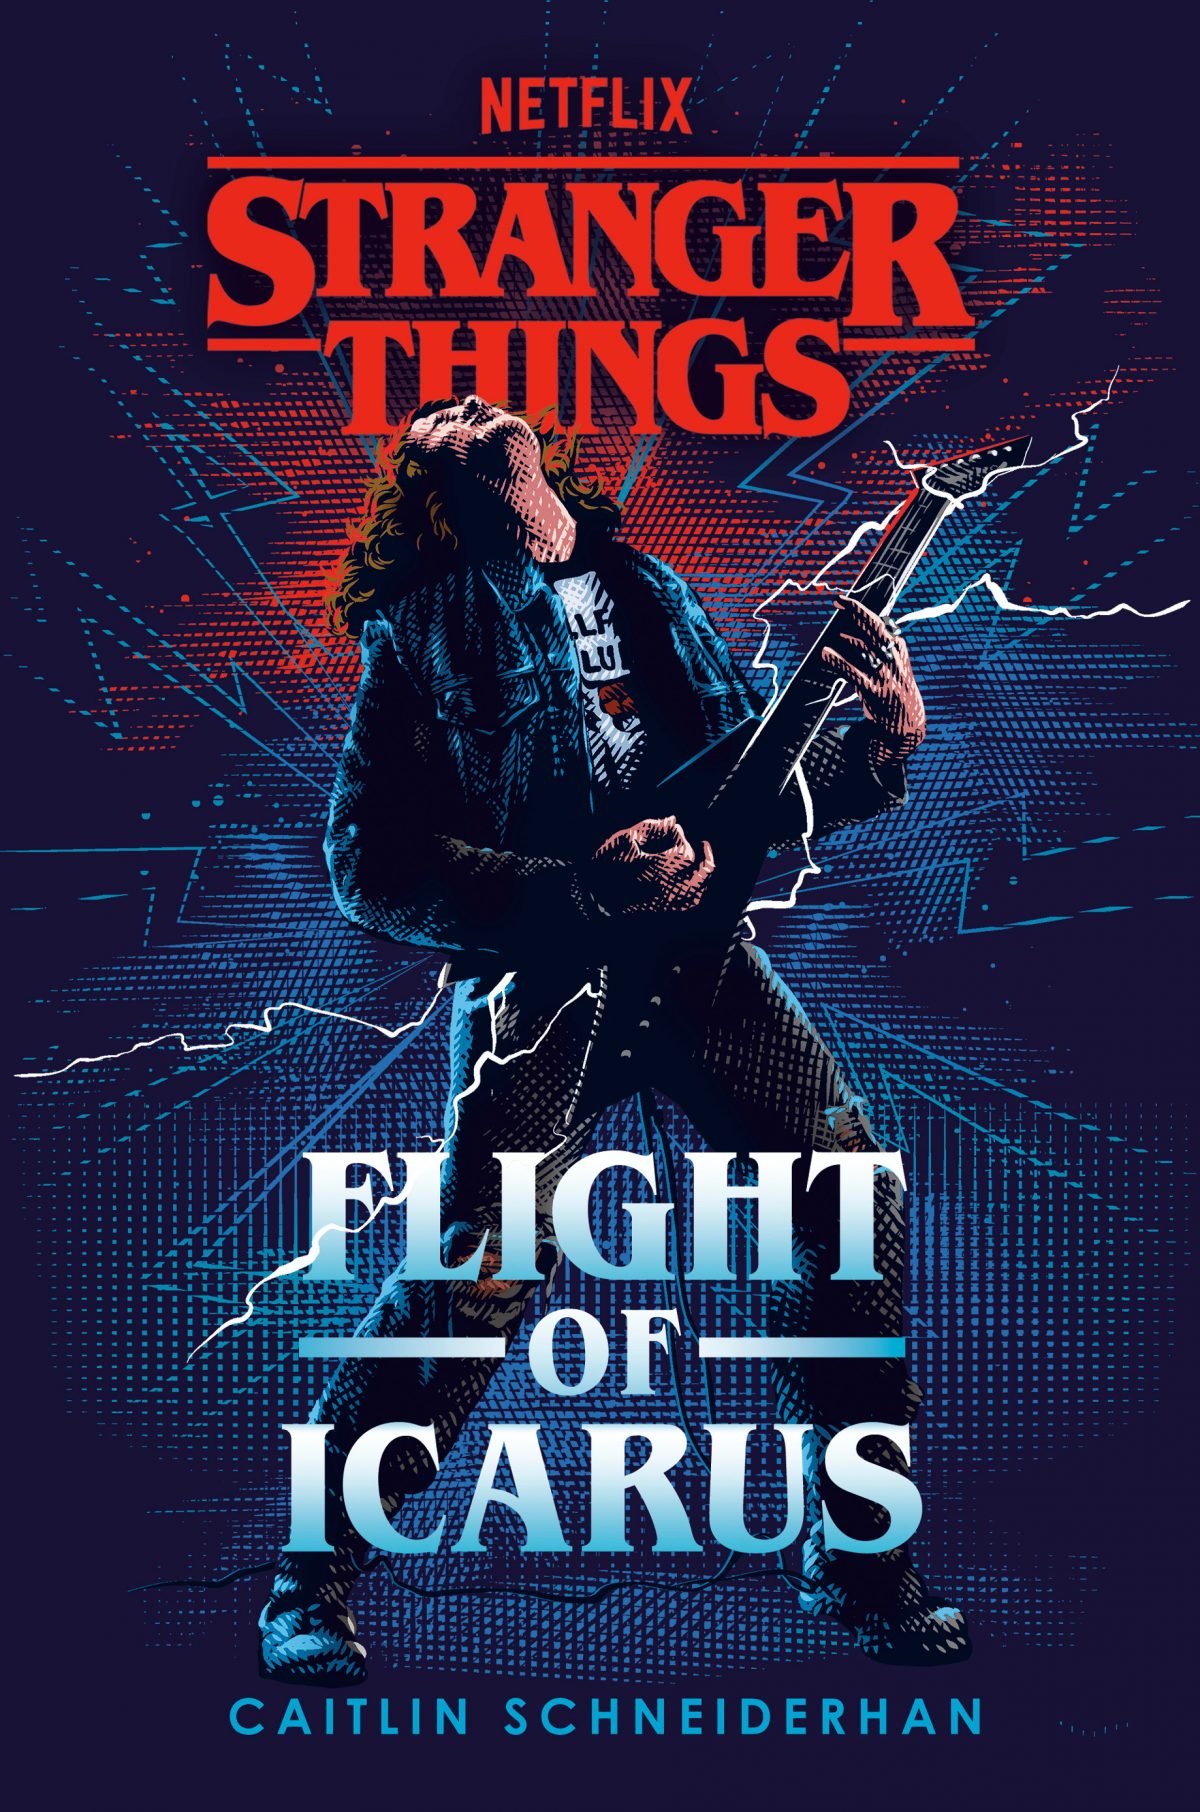 Eddie Munson prequel book Stranger Things Flight of Icarus cover, in this excerpt from the novel we learn more about Eddie's backstory and his dad.